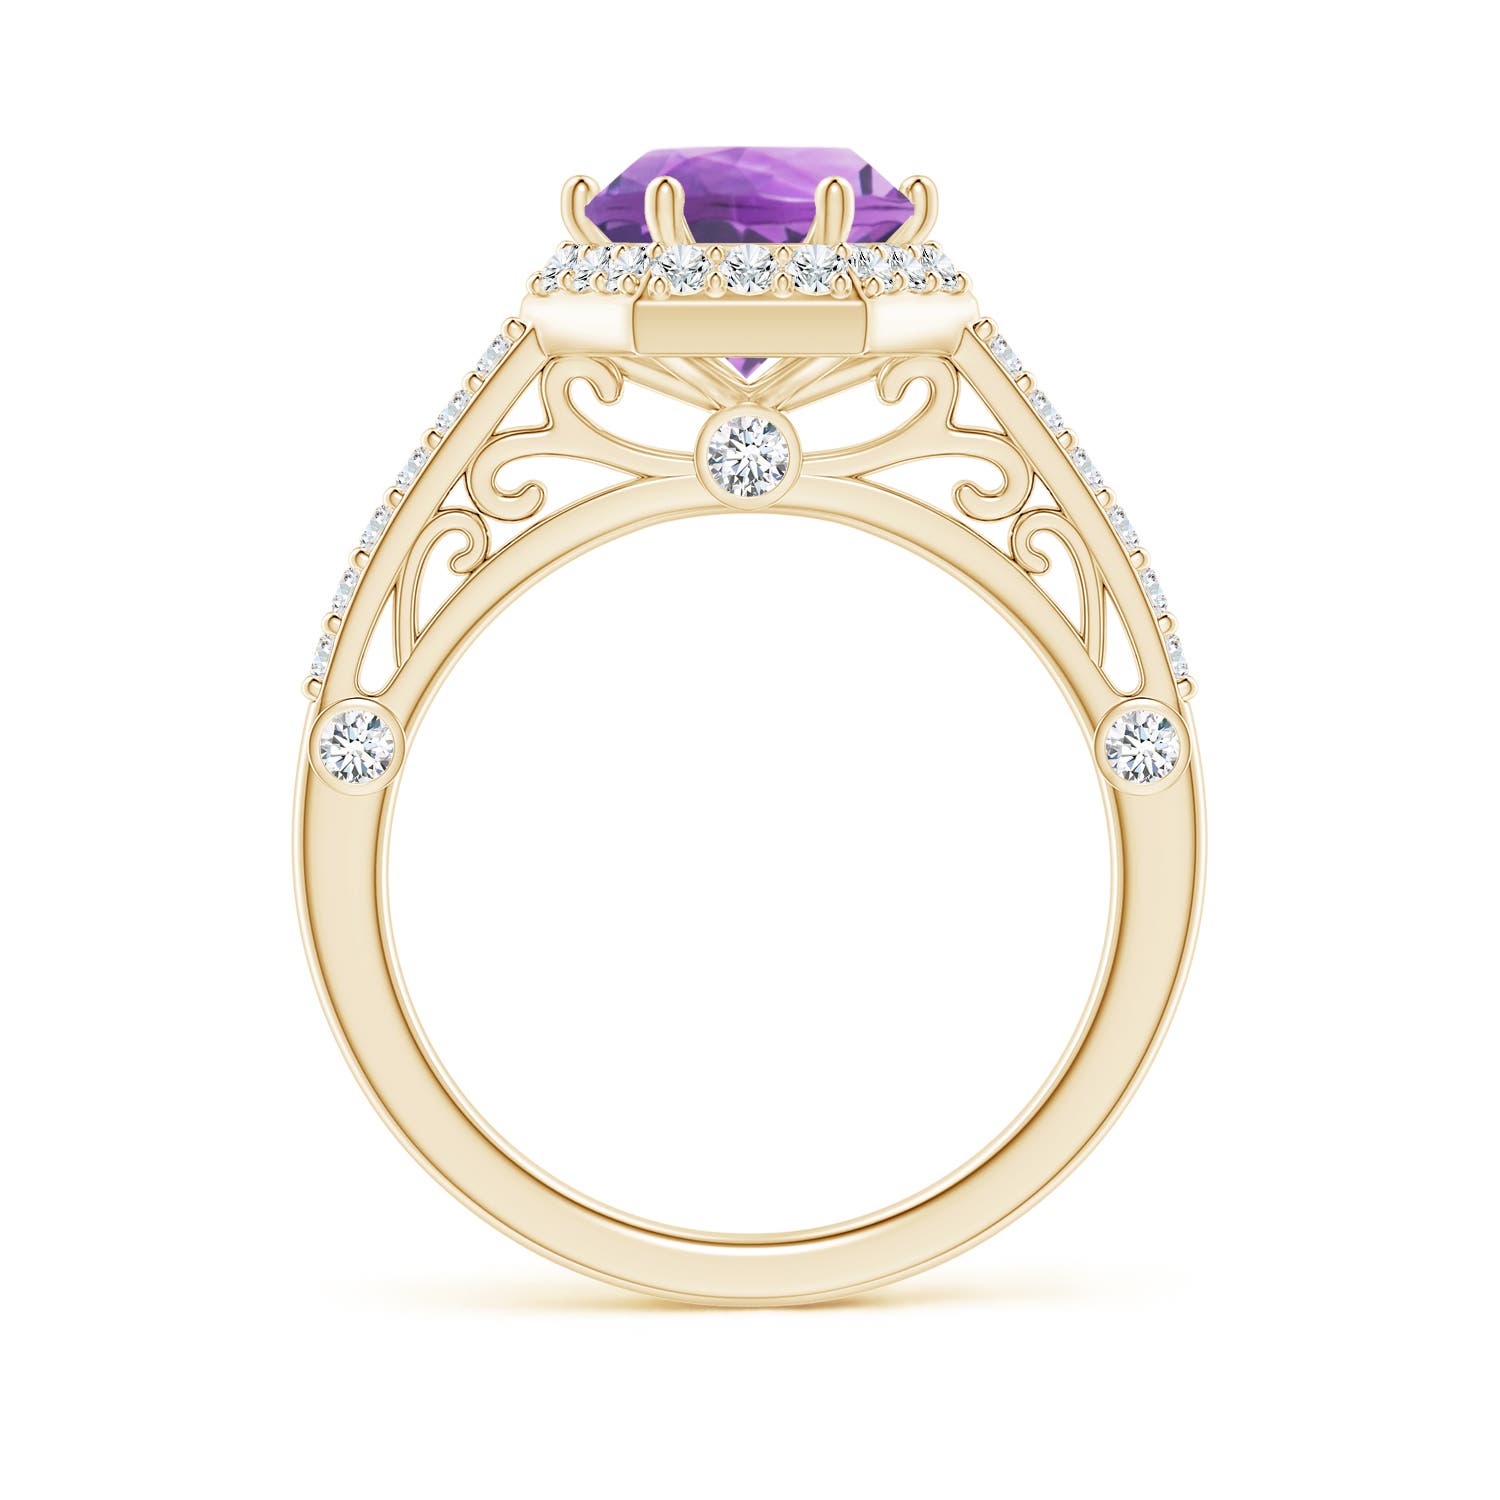 A - Amethyst / 2.14 CT / 14 KT Yellow Gold